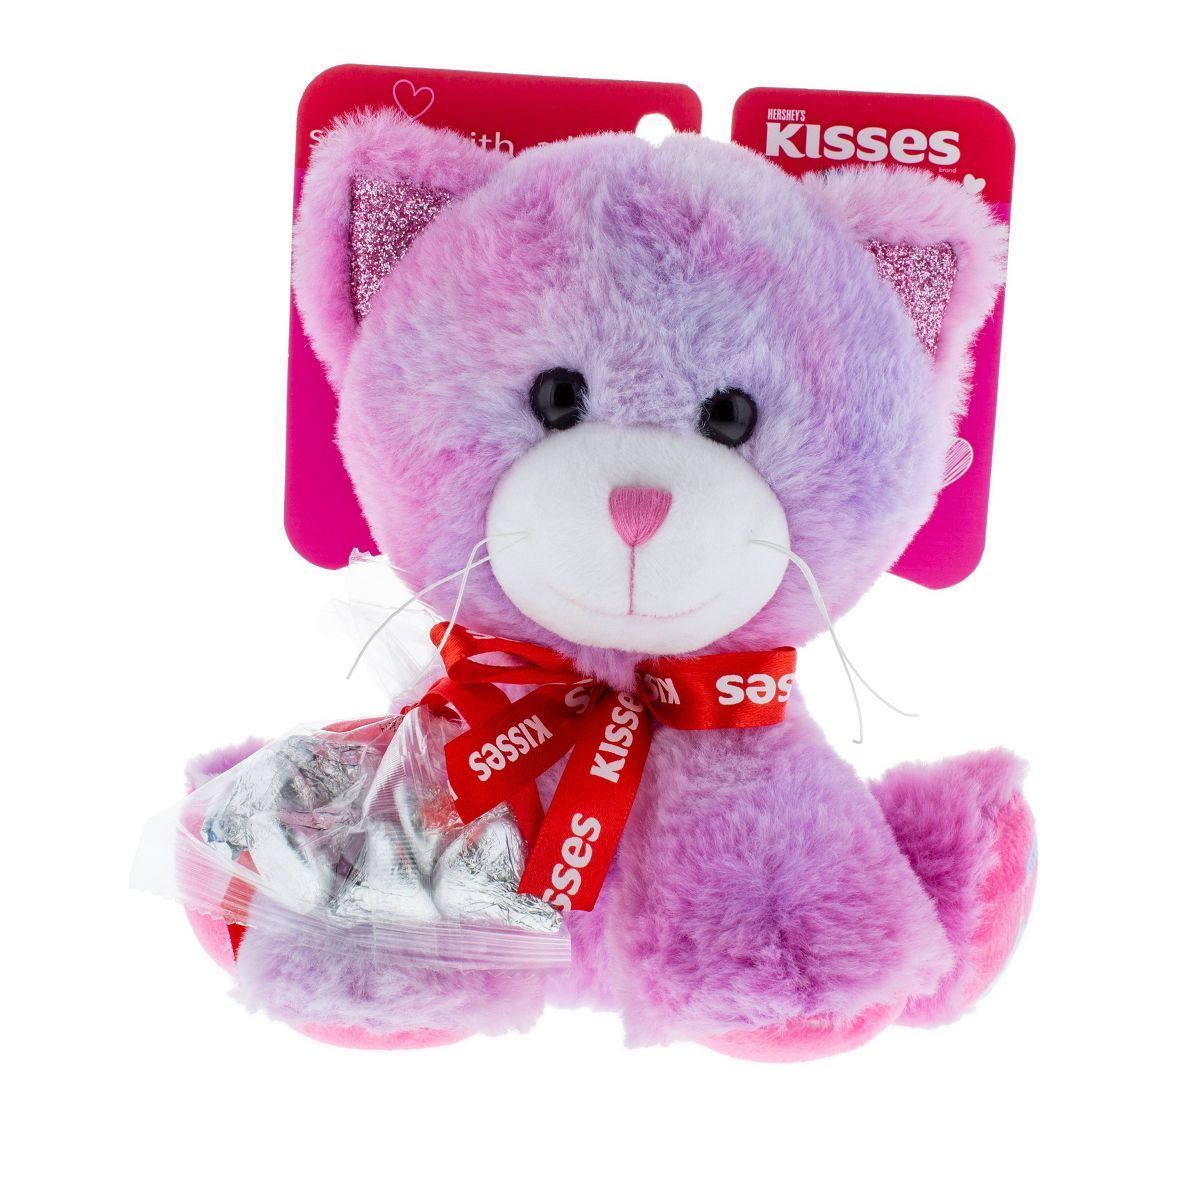 Hershey's Kisses Valentine's Kitten with Chocolate - 0.9oz | Target